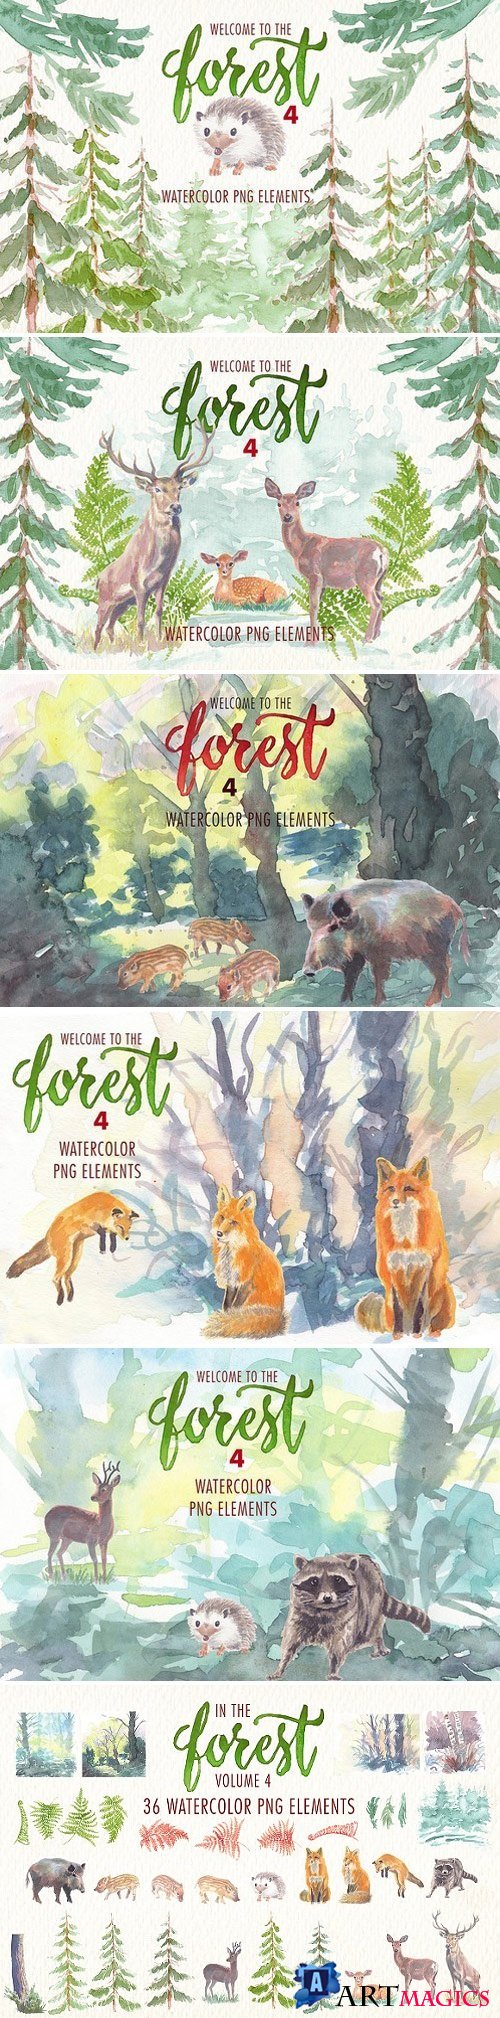 watercolor in the forest clipart 1926459